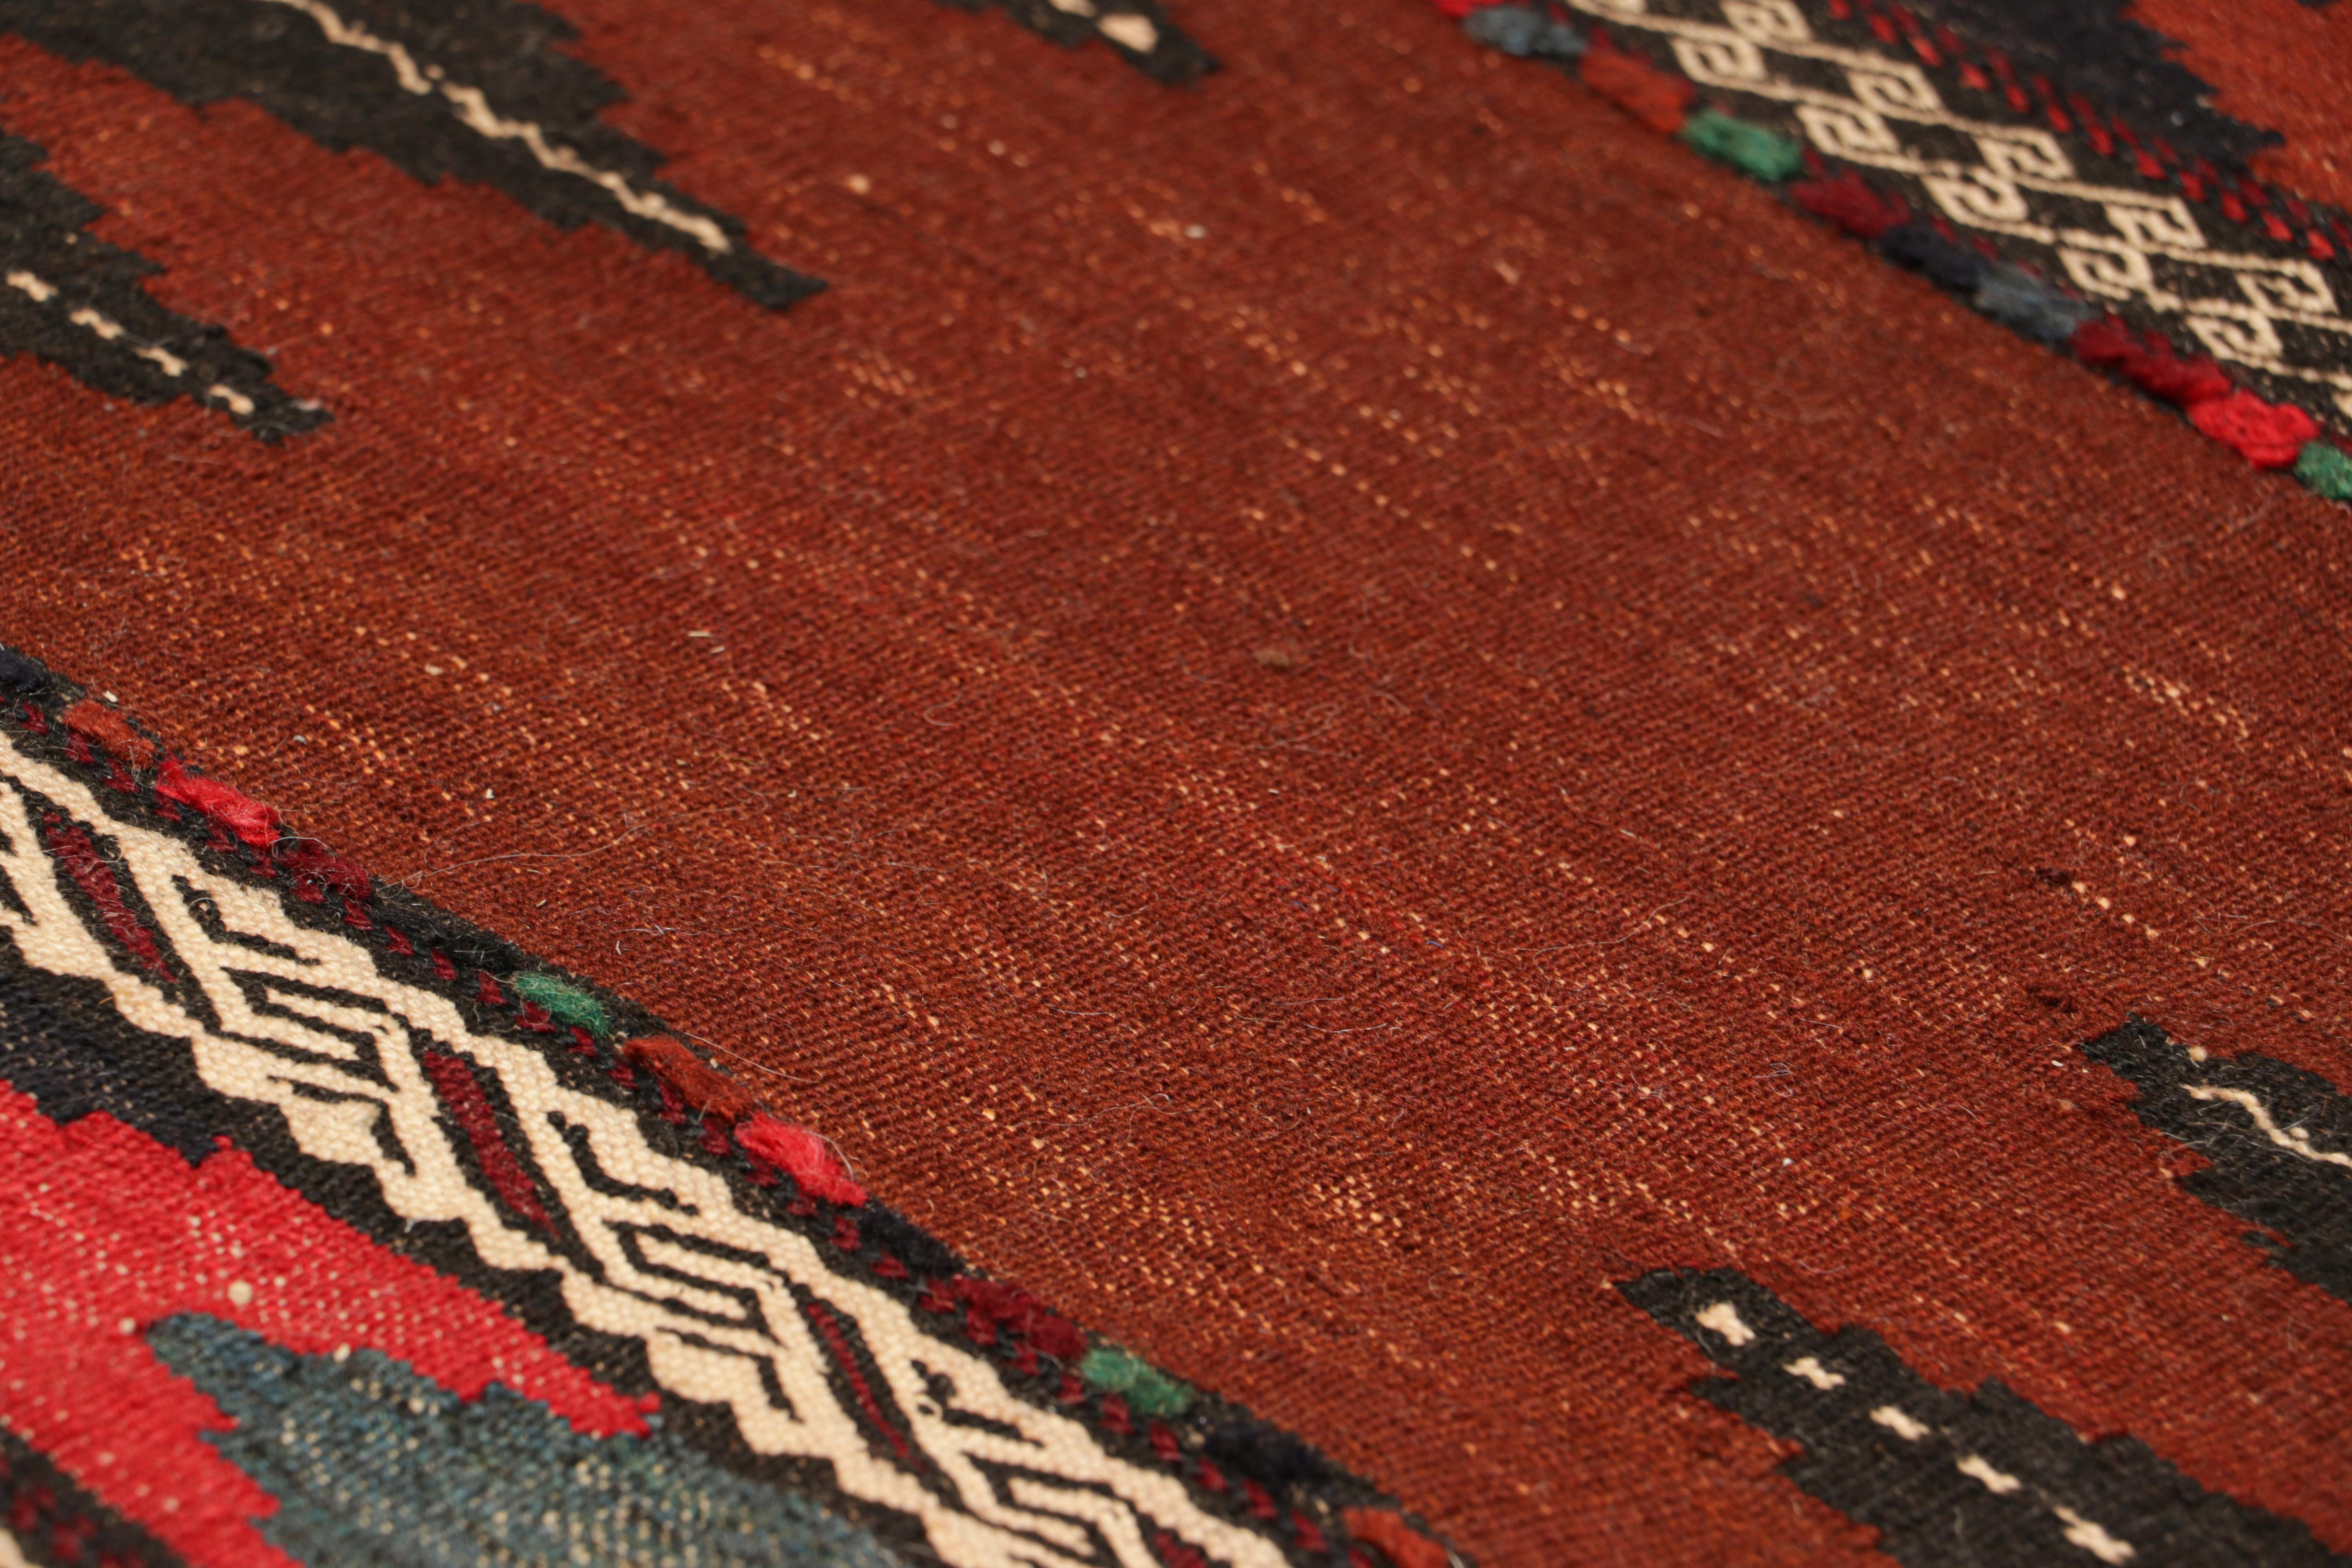 Handwoven in wool, circa 1950-1960, this 3x7 vintage Afghan tribal kilim, is a collectible tribal piece that may have been used as table covers in nomadic daily life, much similar to Persian Sofreh Kilims.

On the Design: 

Drawing on Afghan tribal